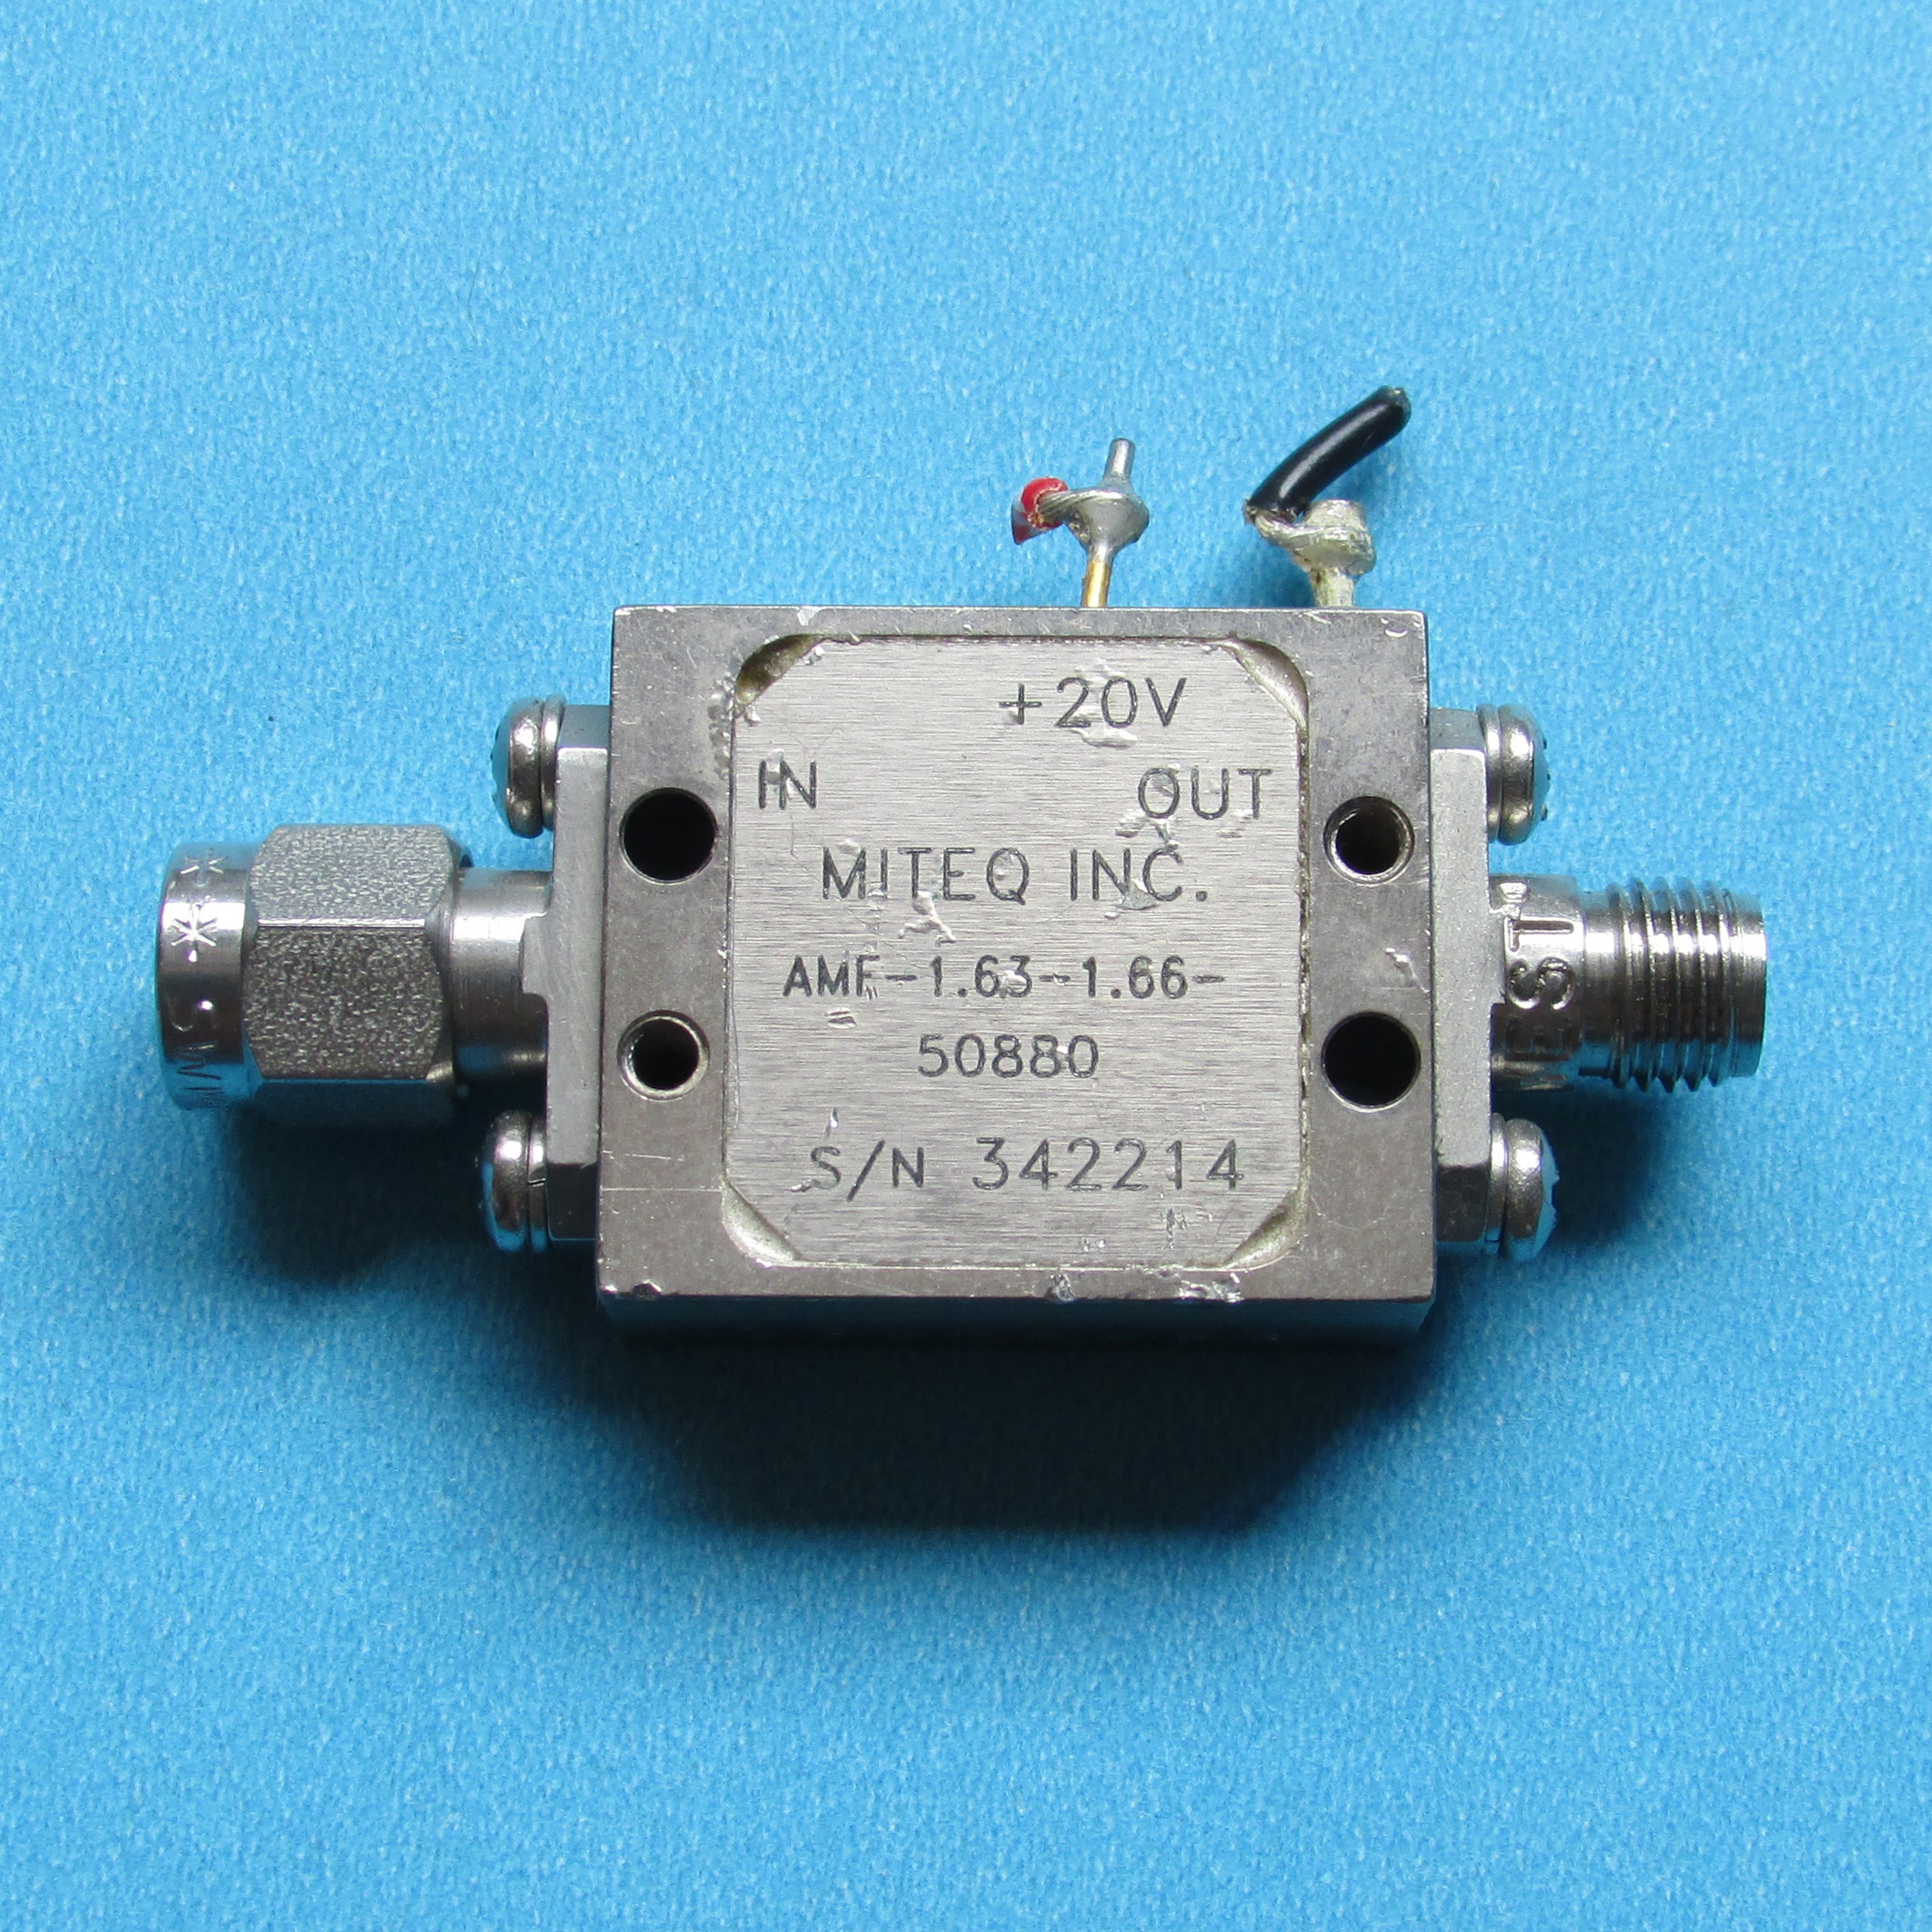 MITEQ AMF-1.63-1.65-50880 200-2500MHz 18dB SMA low noise amplifier